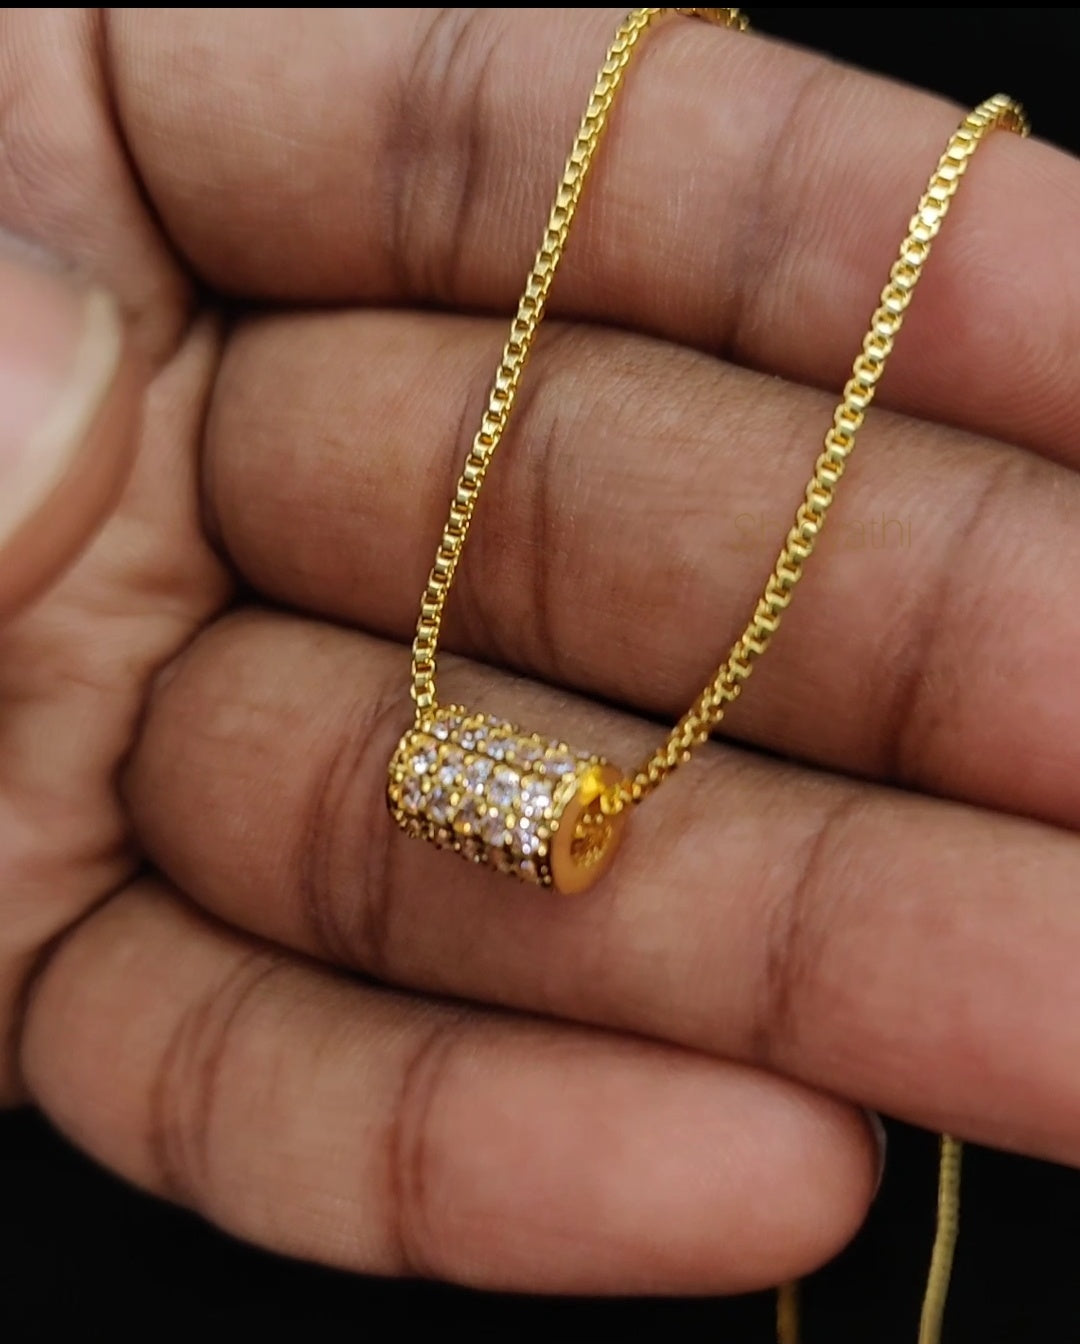 Gold plated chain and pendant